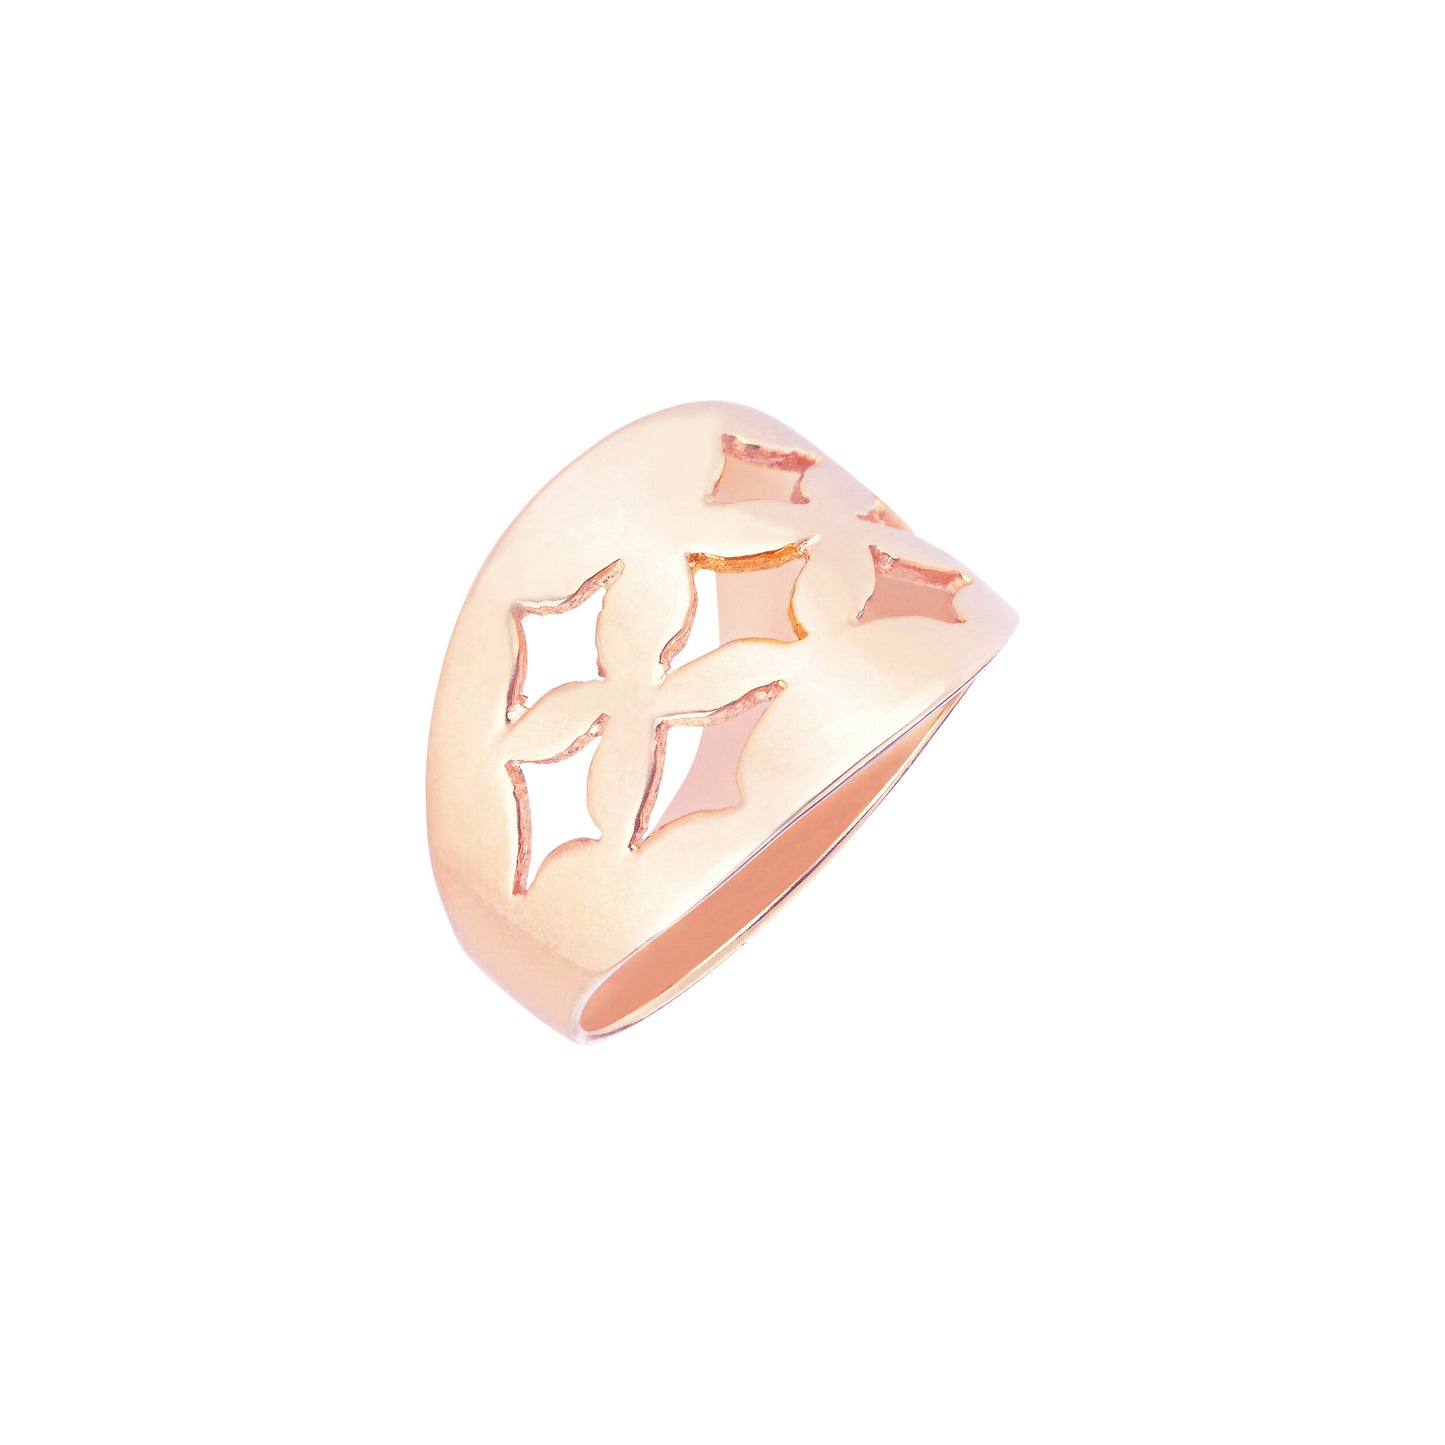 Perforate Rhombus Ring - Pink Gold Plated